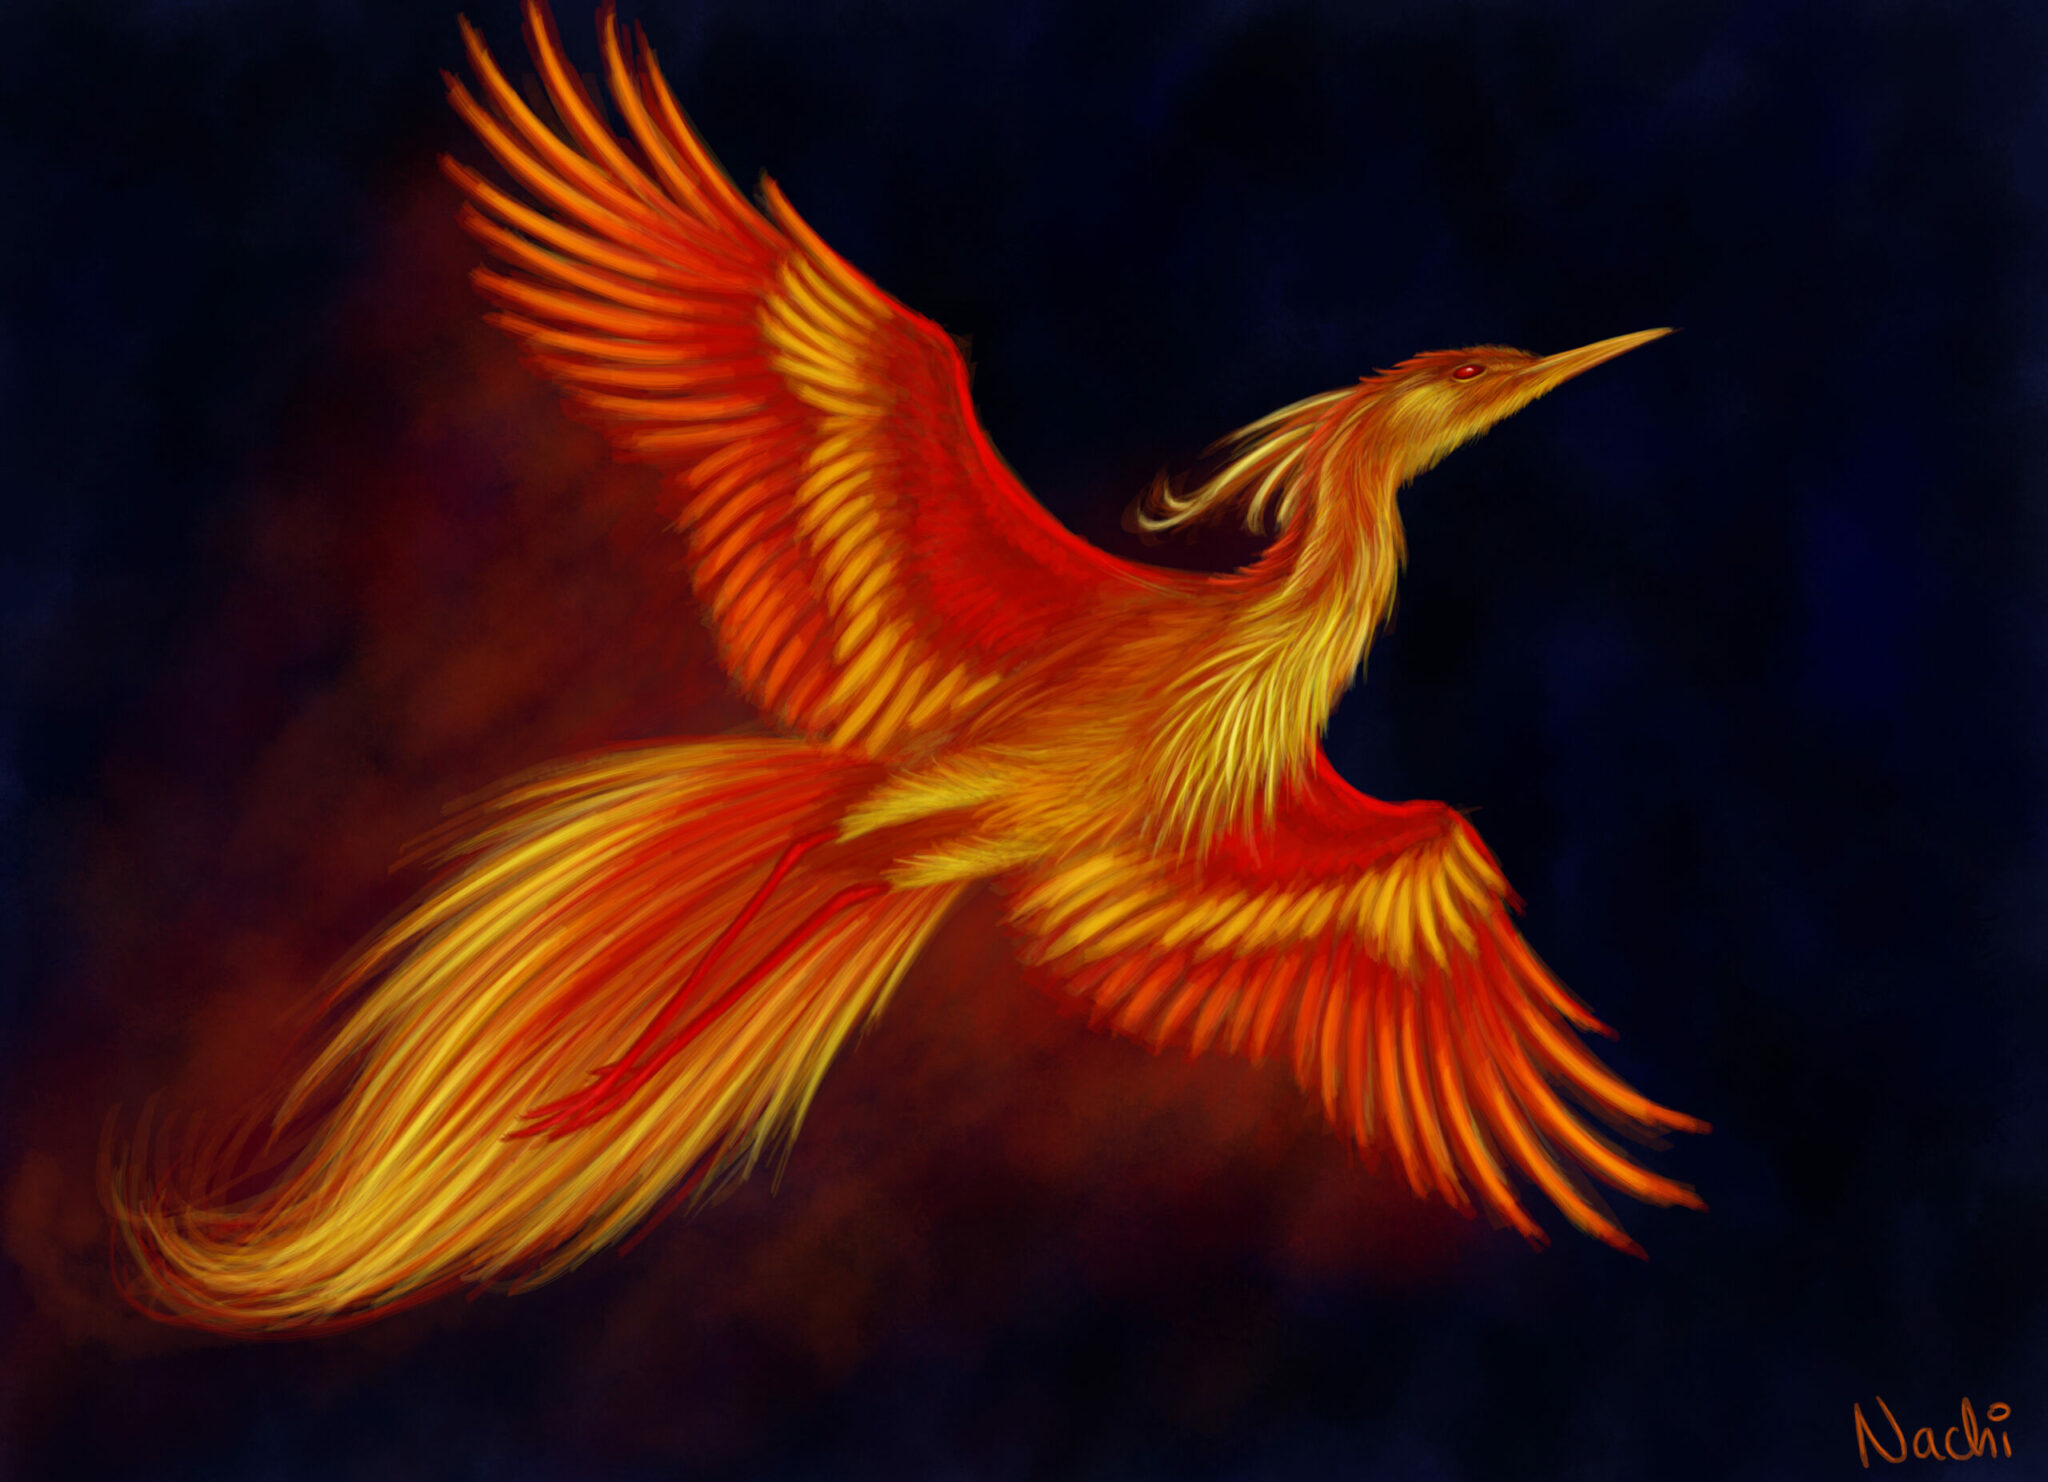 was the phoenix ever a real bird